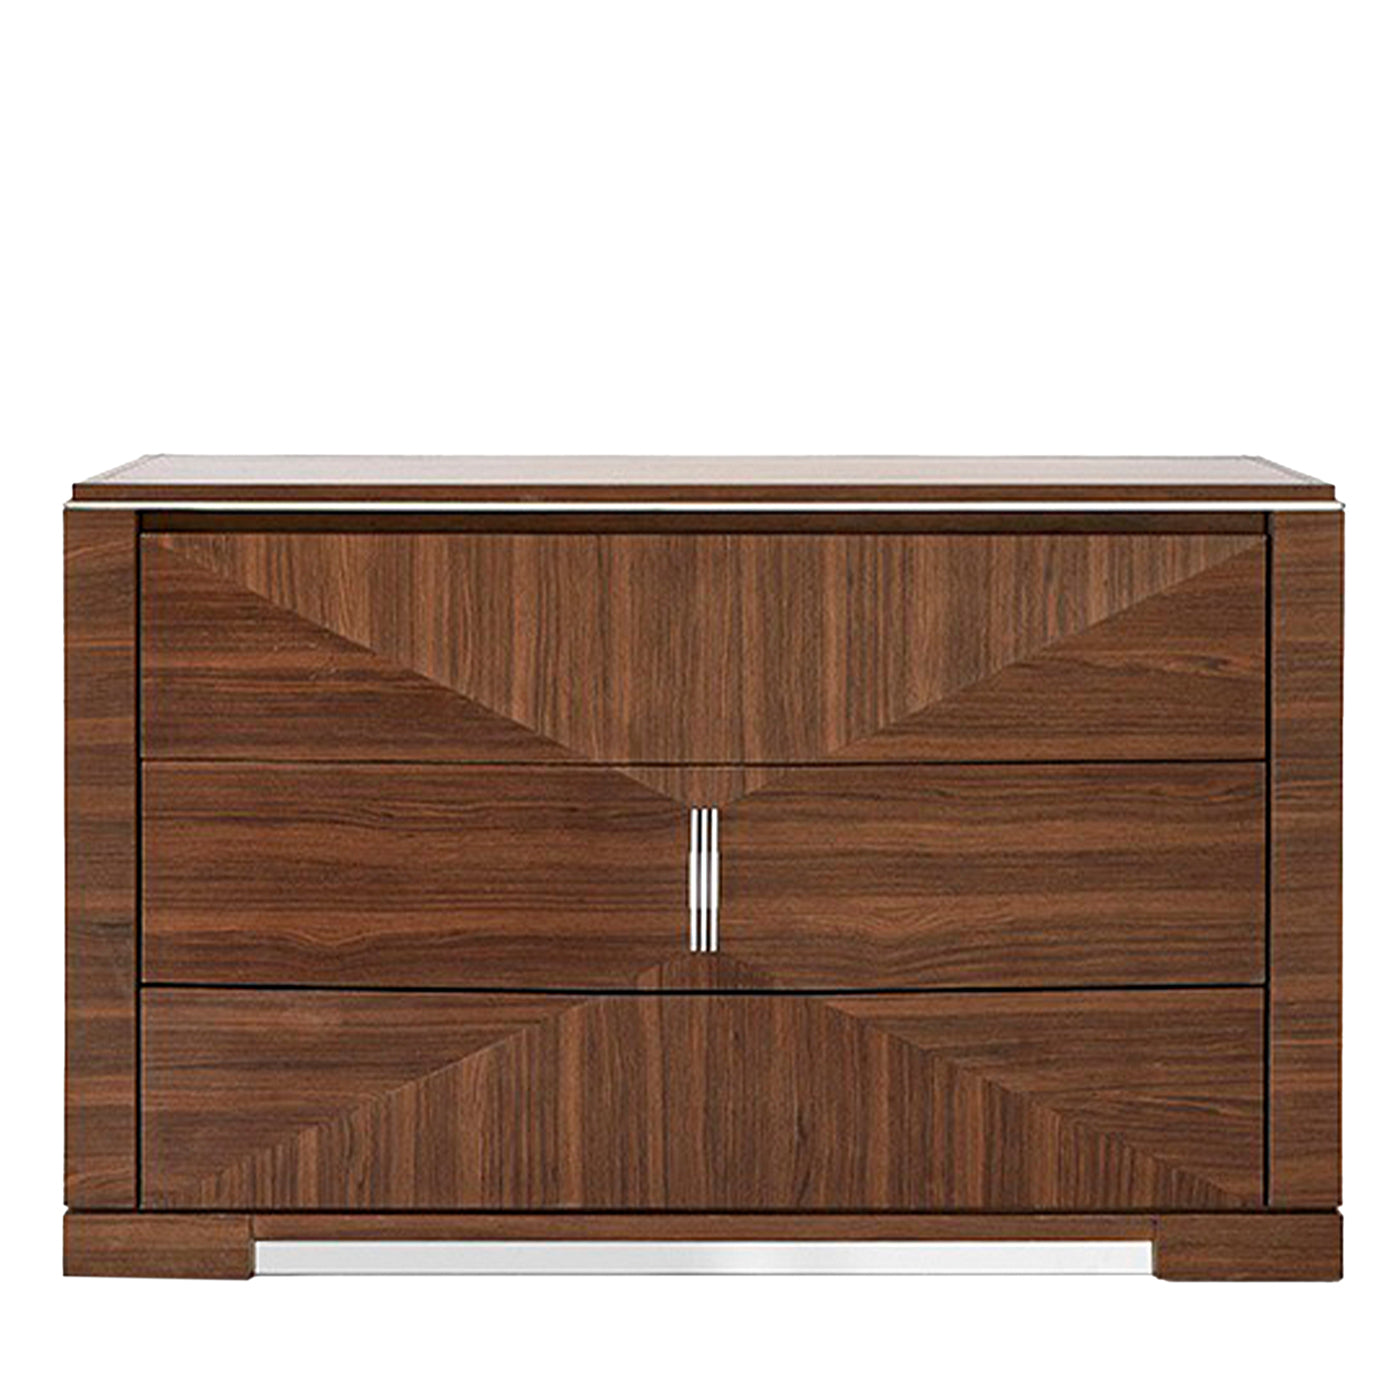 FB Collection Crystak Chest of 3 Drawers - Main view